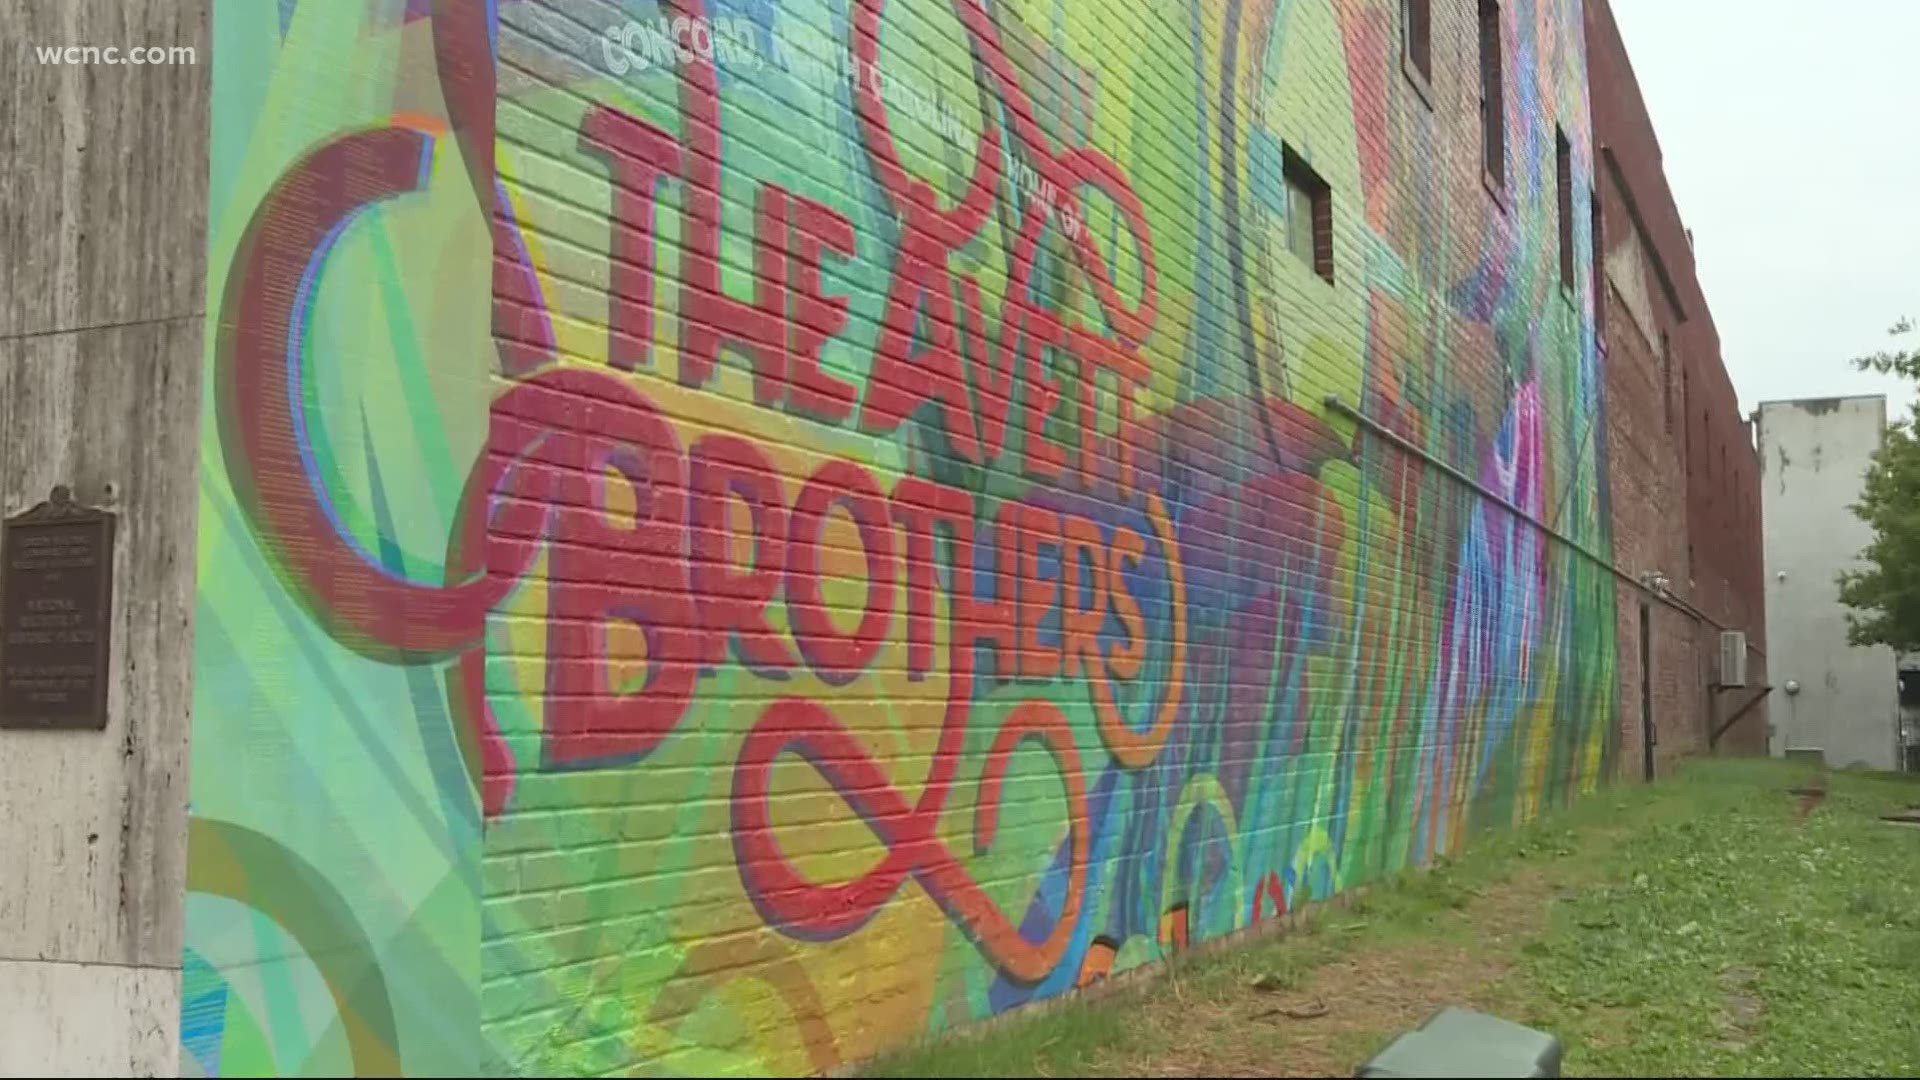 Caswell Turner said it was a dream come true when the City of Concord commissioned her for a mural in downtown. She immediately wanted to honor the Avett Brothers.